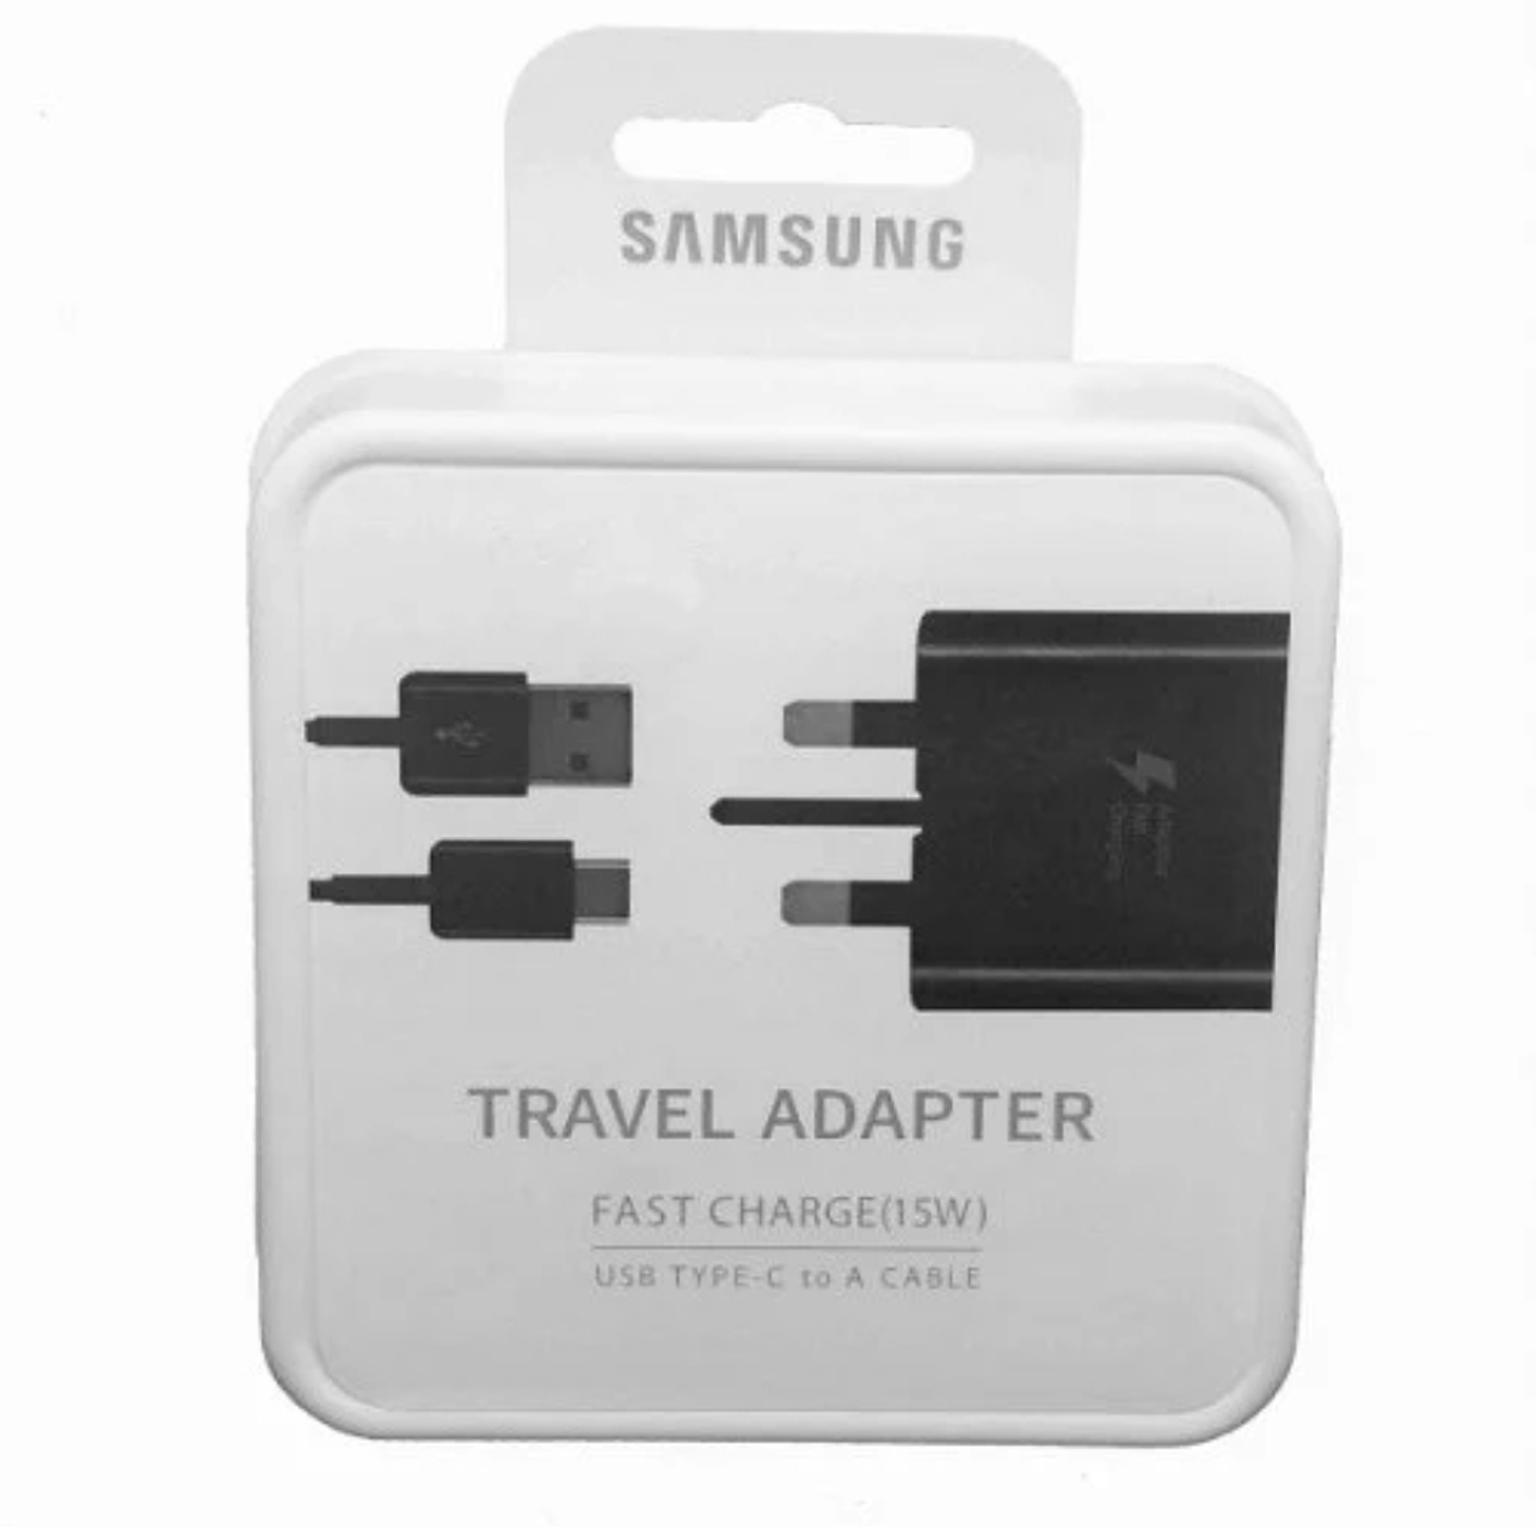 Фаст чардж. Travel Adapter 25w Samsung USB Type c. Samsung Travel Adapter super fast Charging 25w /USB Micro. Samsung Travel Adapter USB-C 25w + Cable Type-c 3a. СЗУ Samsung Adapter 25w PD USB-C Cable 2-Pin Black.